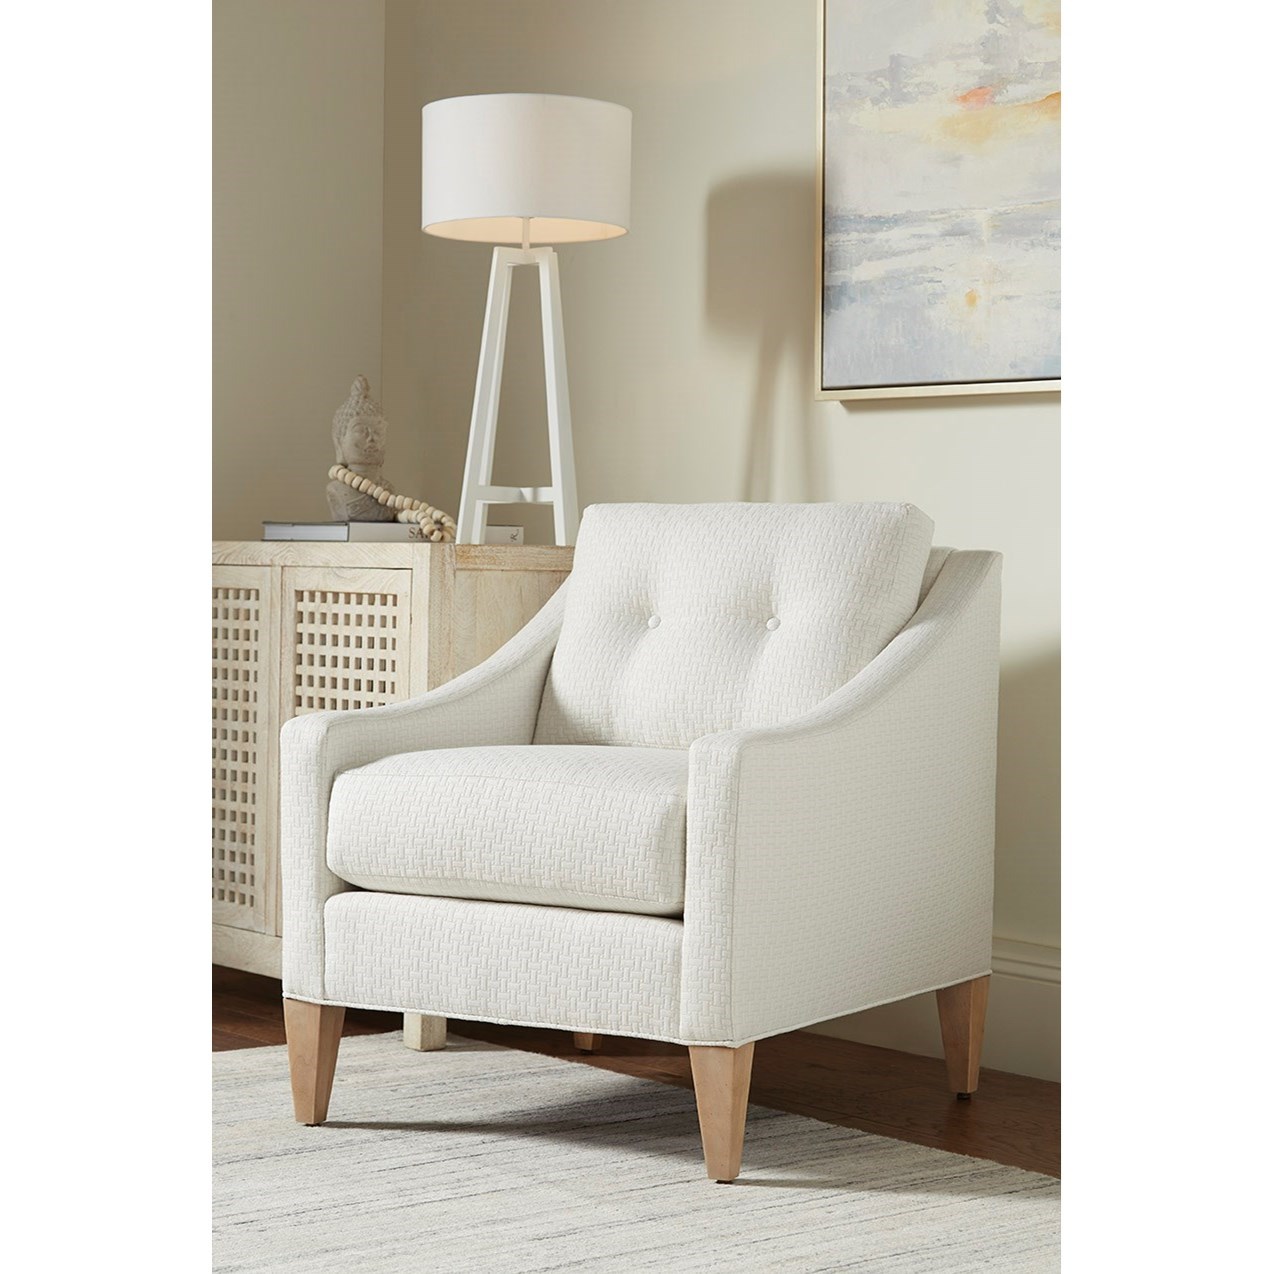 Tufted Pillow Back Chair